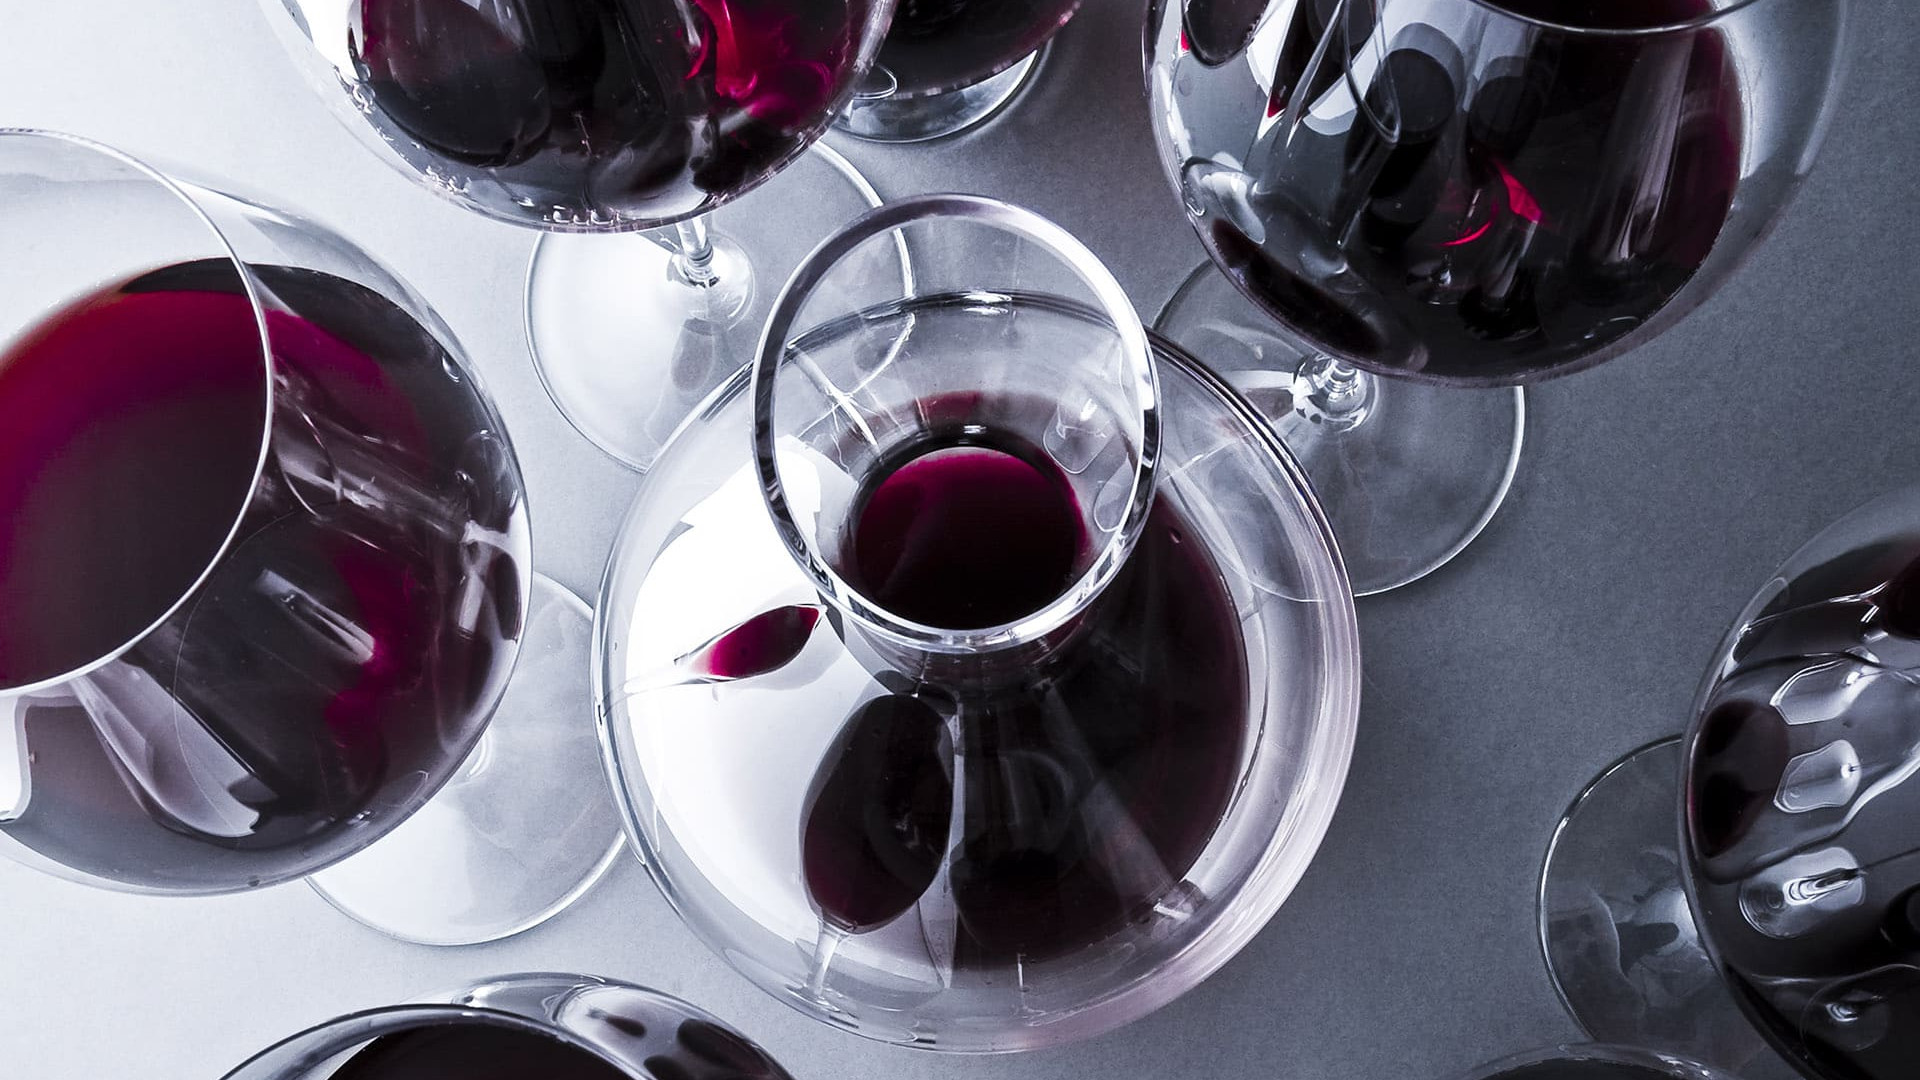 How much is too much when it comes to decanting? / Getty